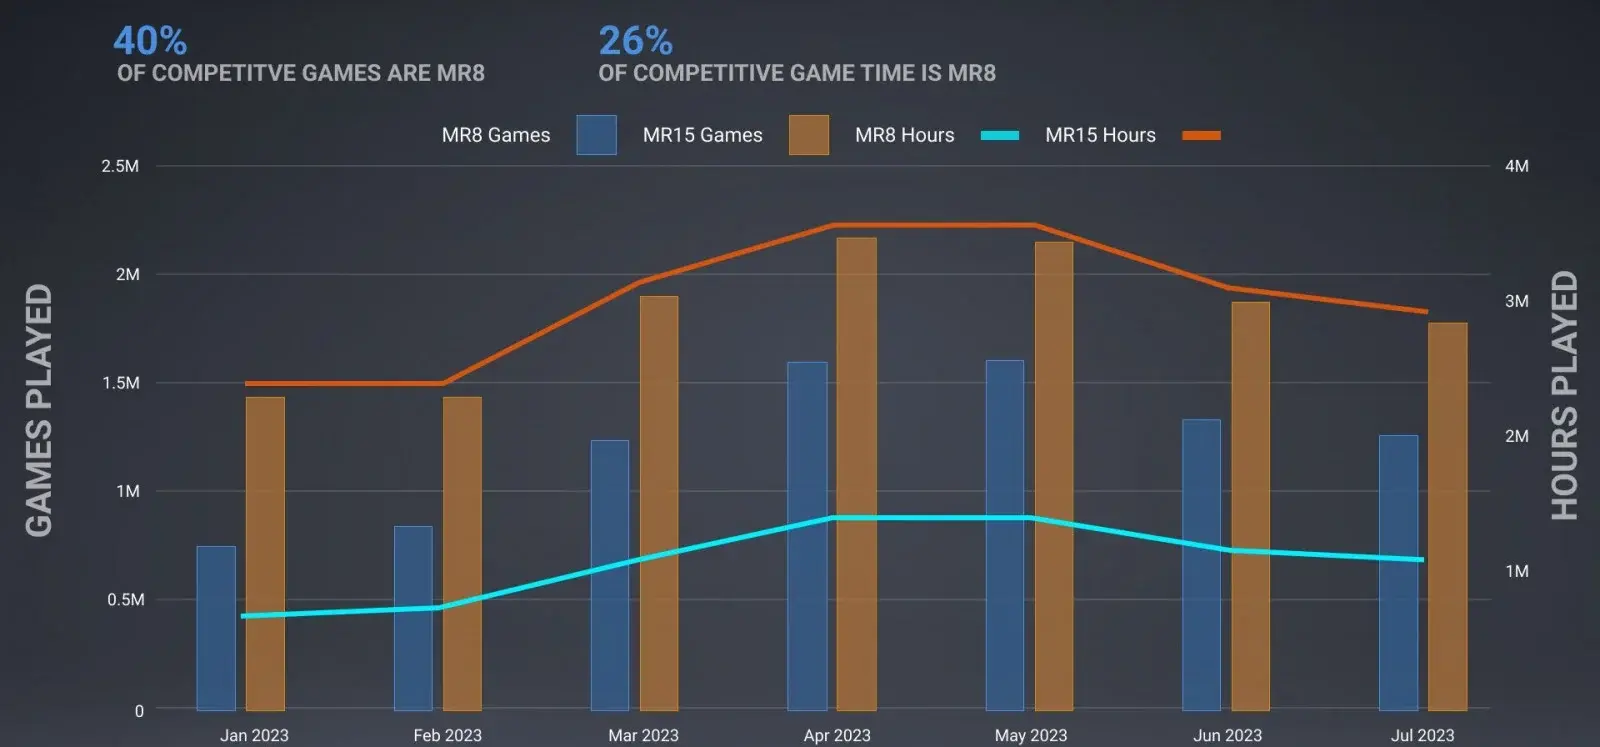 40% of CS:GO matchmaking players prefer short MR8 matches